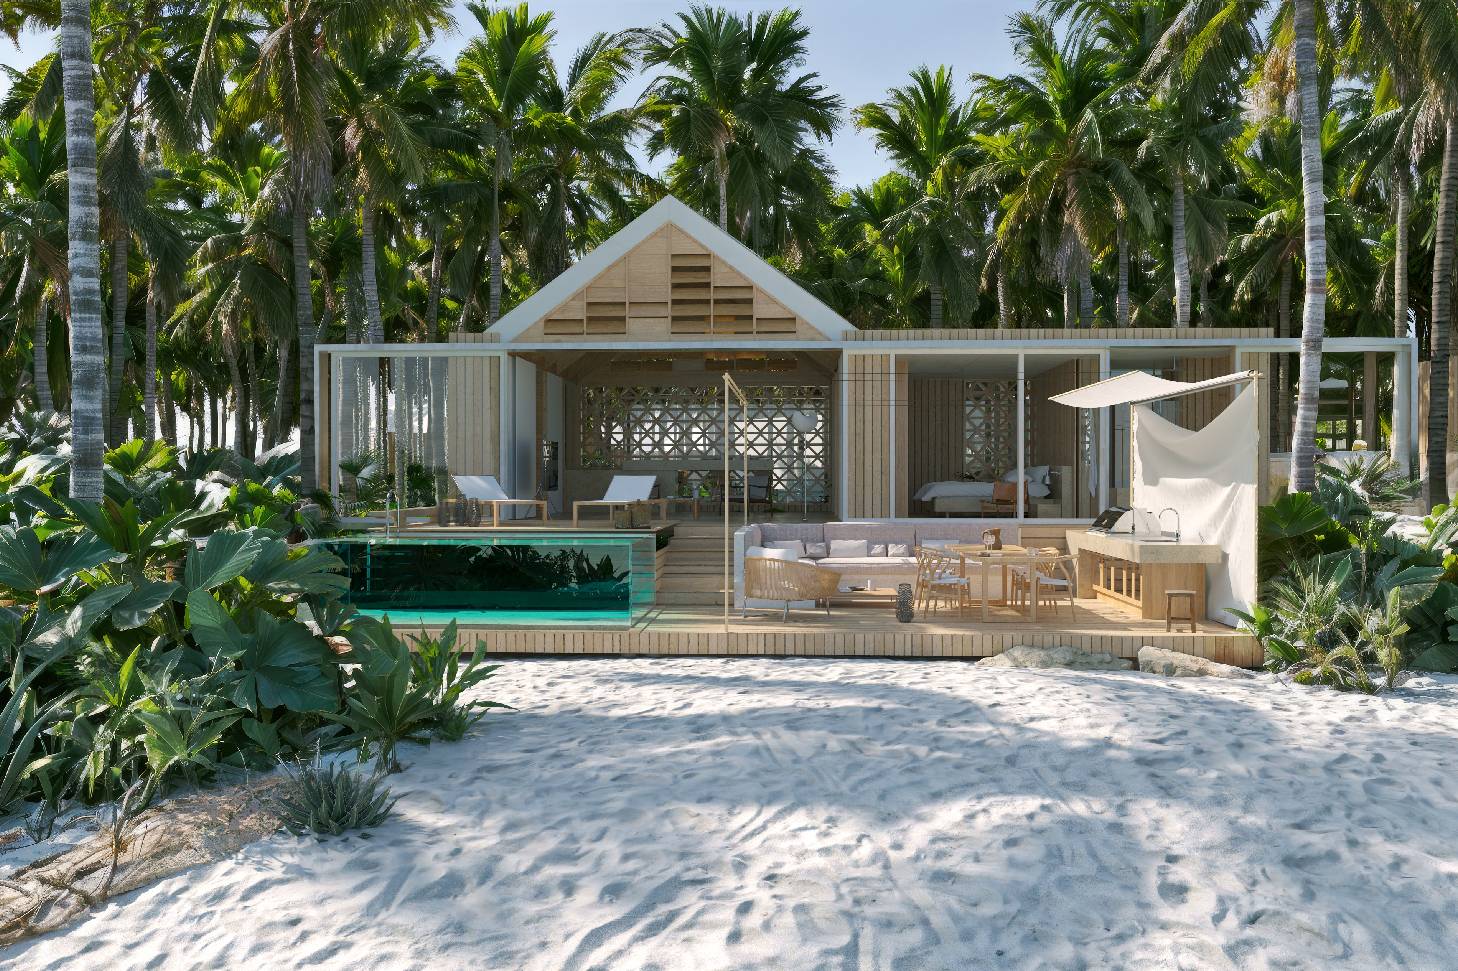 PREMIUM ONE BEDROOM VILLA on first Ultra Premium Residence Resort in the Maldives Malé Atoll